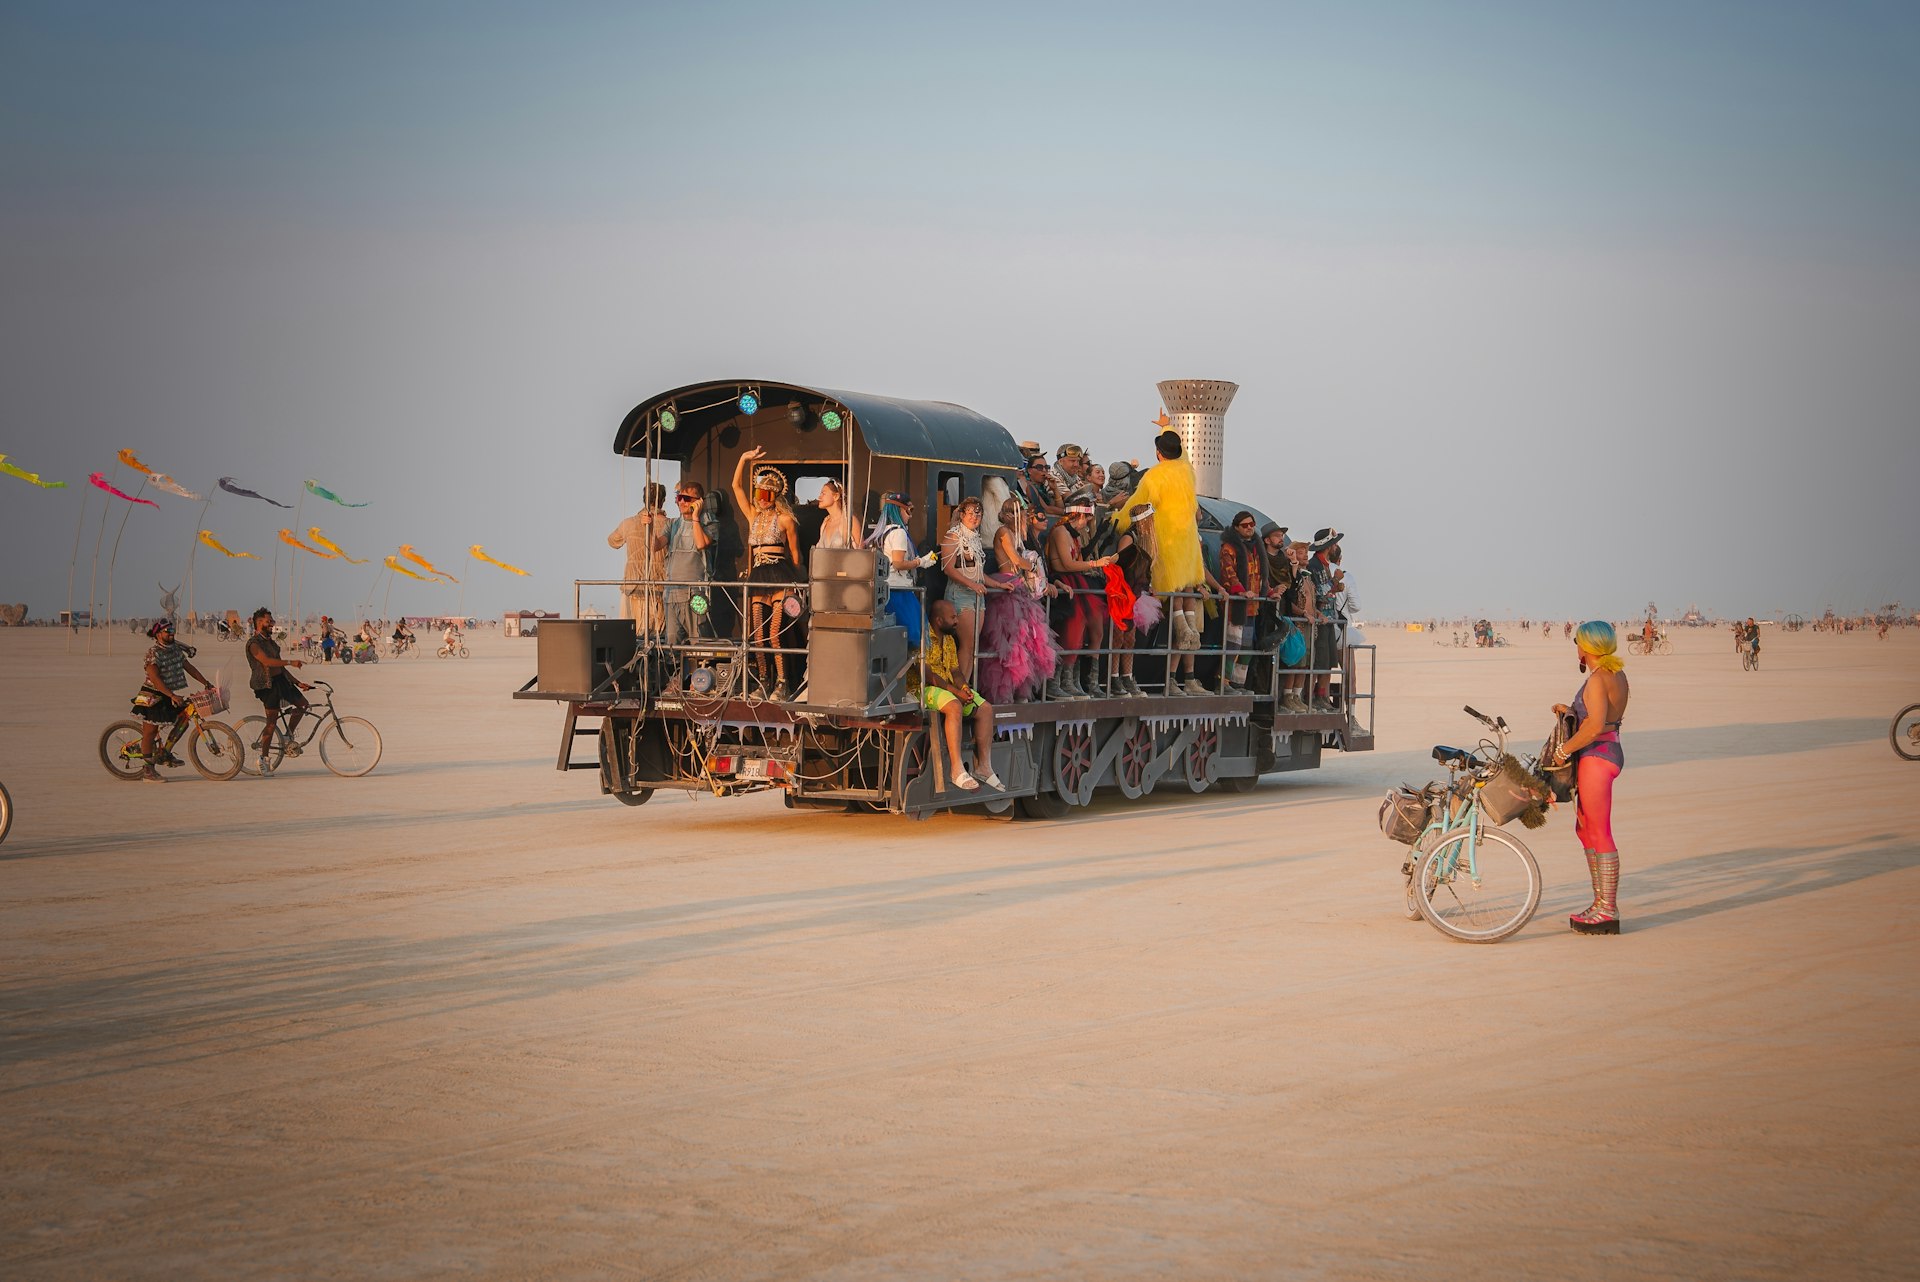 People in a festive vehicles and on bicycles at the Burning Man festival, Black Rock Desert, Nevada, USA